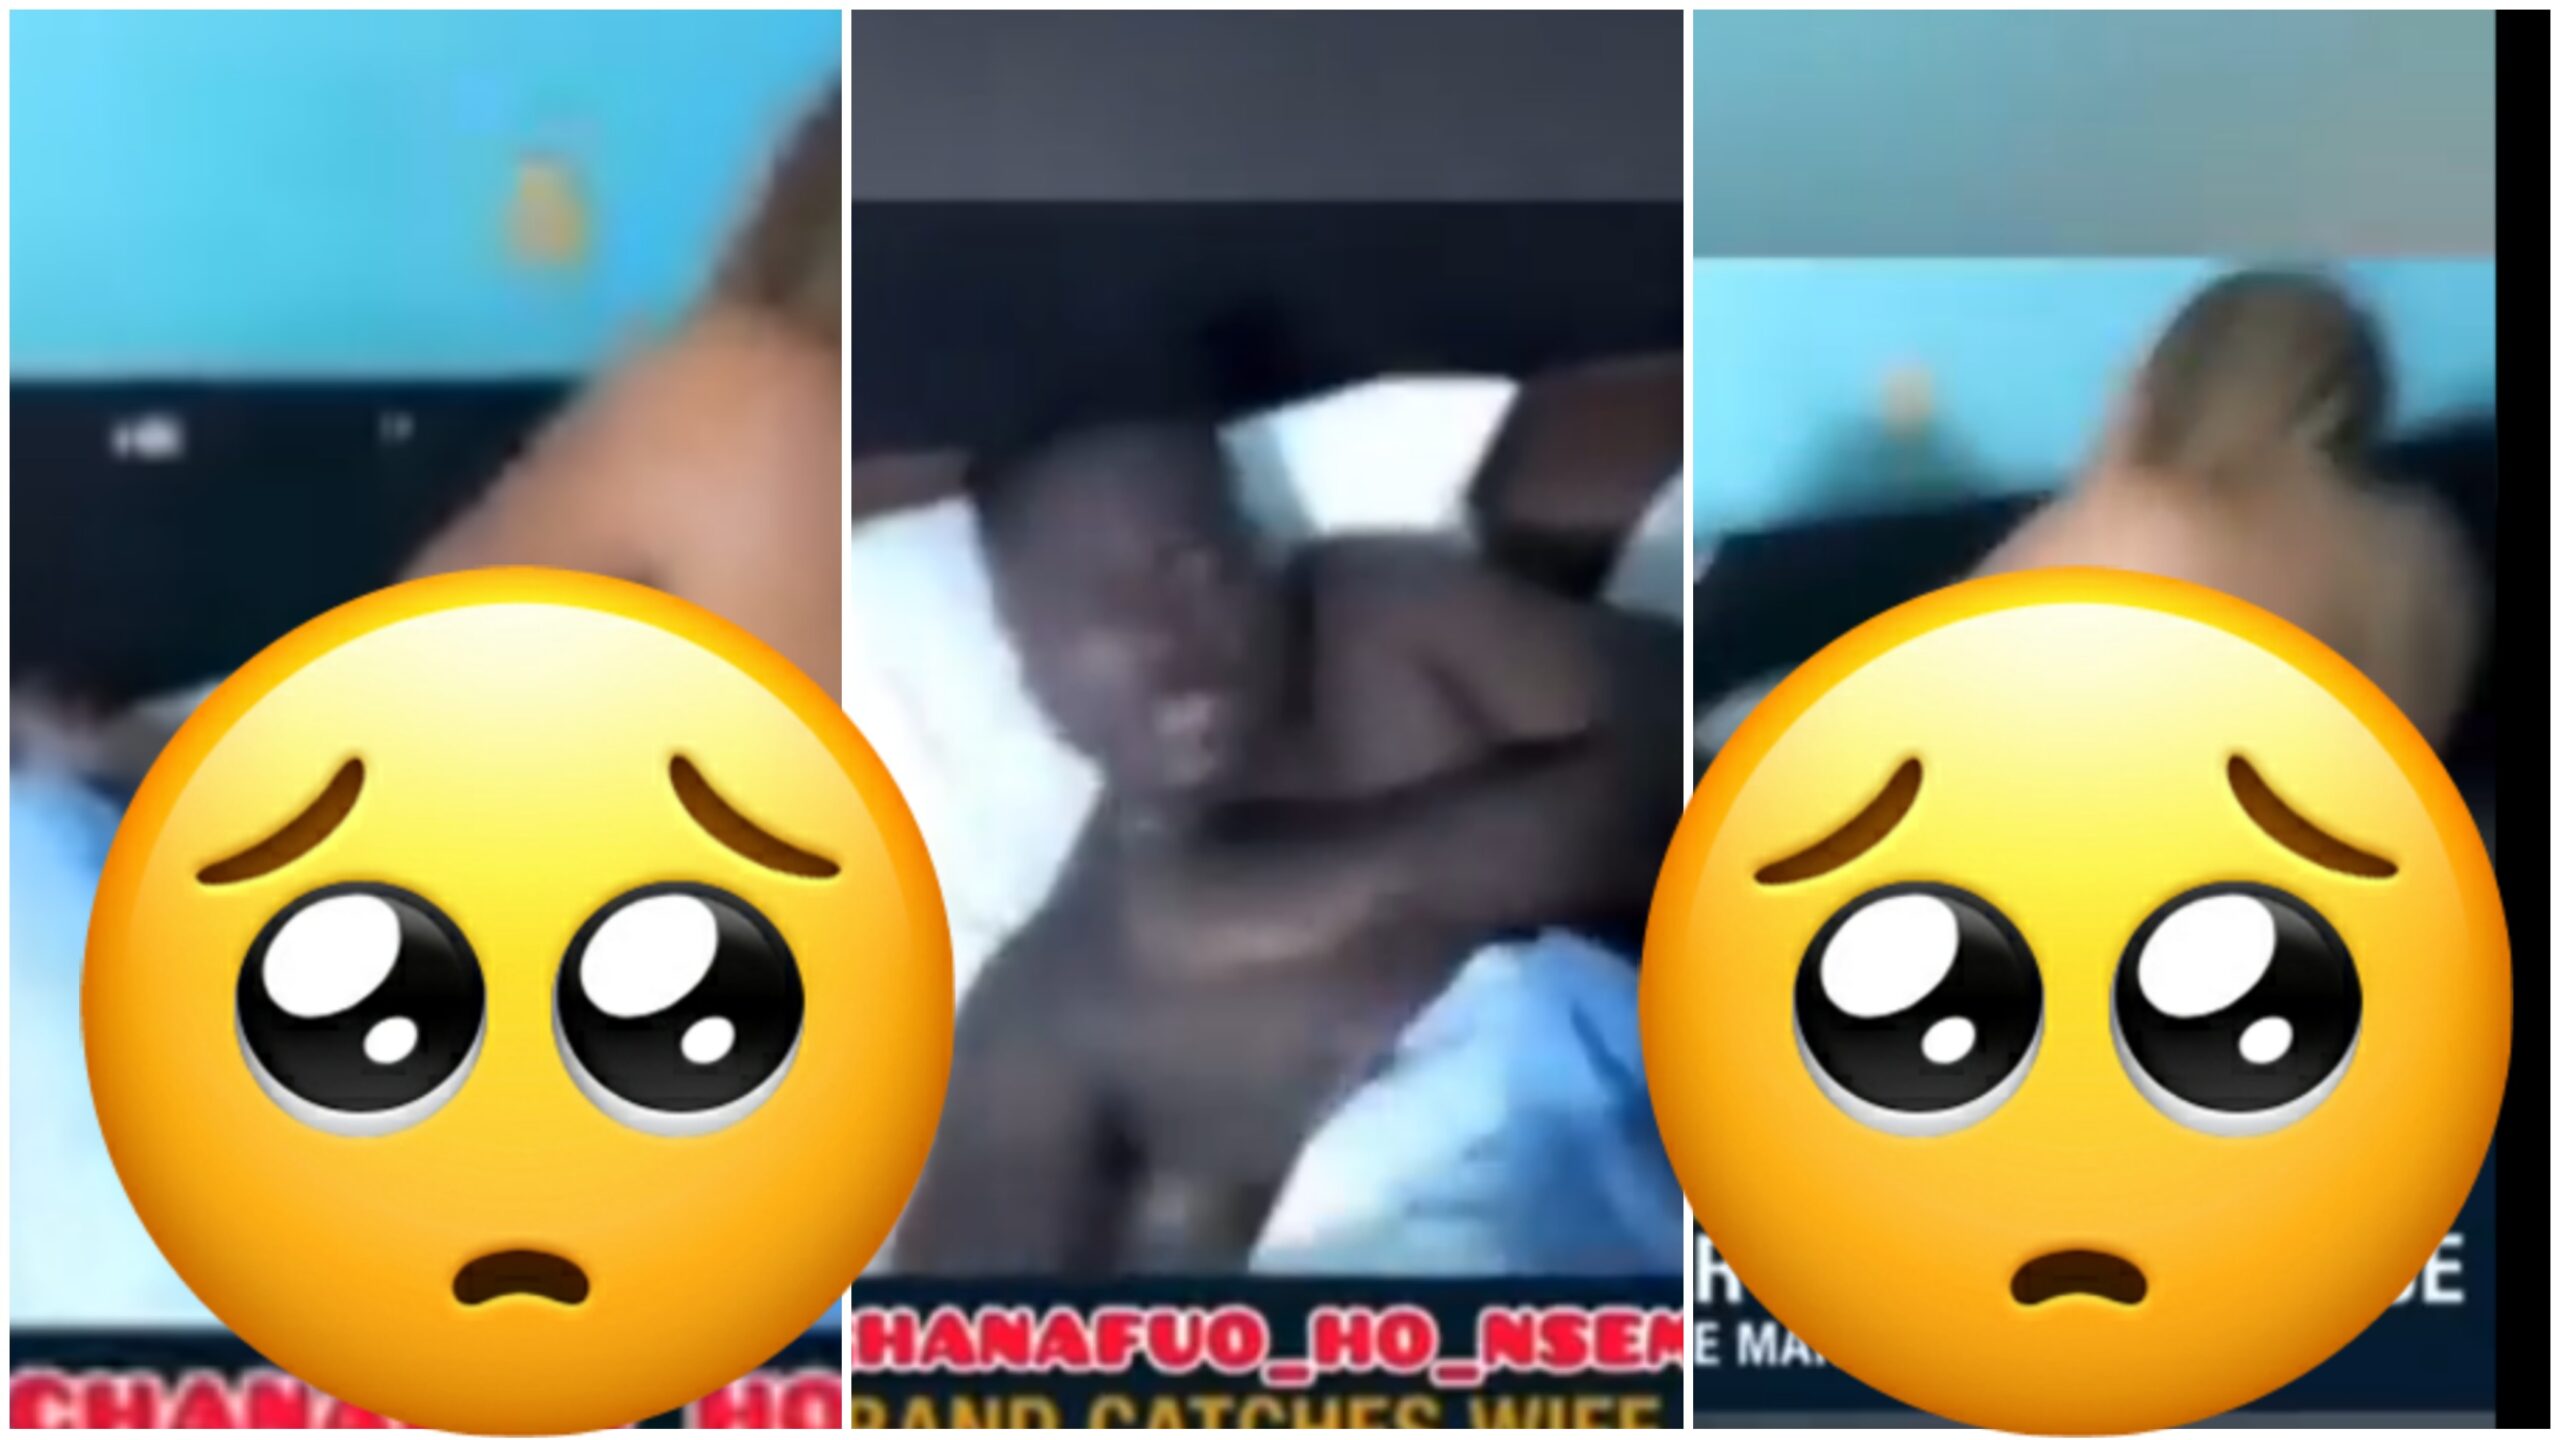 Husband catches wife red-handed sleeping with a colleague worker on their matrimonial bed (+VIDEO)